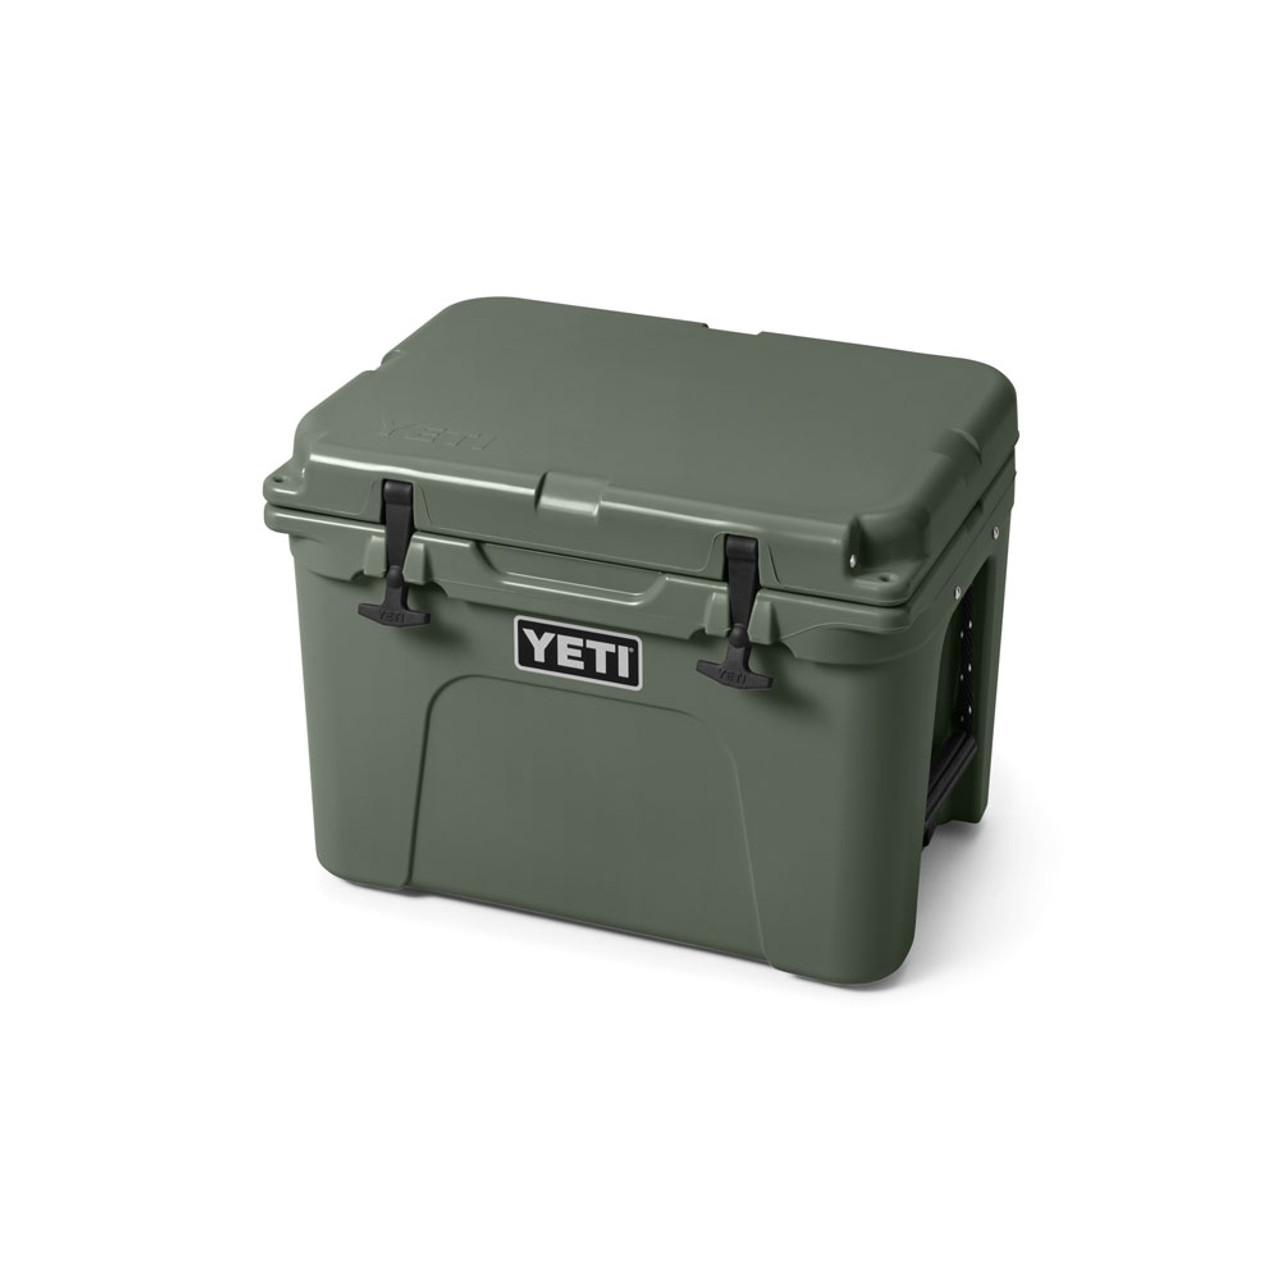 https://cdn11.bigcommerce.com/s-zut1msomd6/images/stencil/1280x1280/products/38558/236755/yeti-10035380000-tundra-35-hard-cooler-campgrn-camp-green-3qtr__21219.1690478213.jpg?c=1